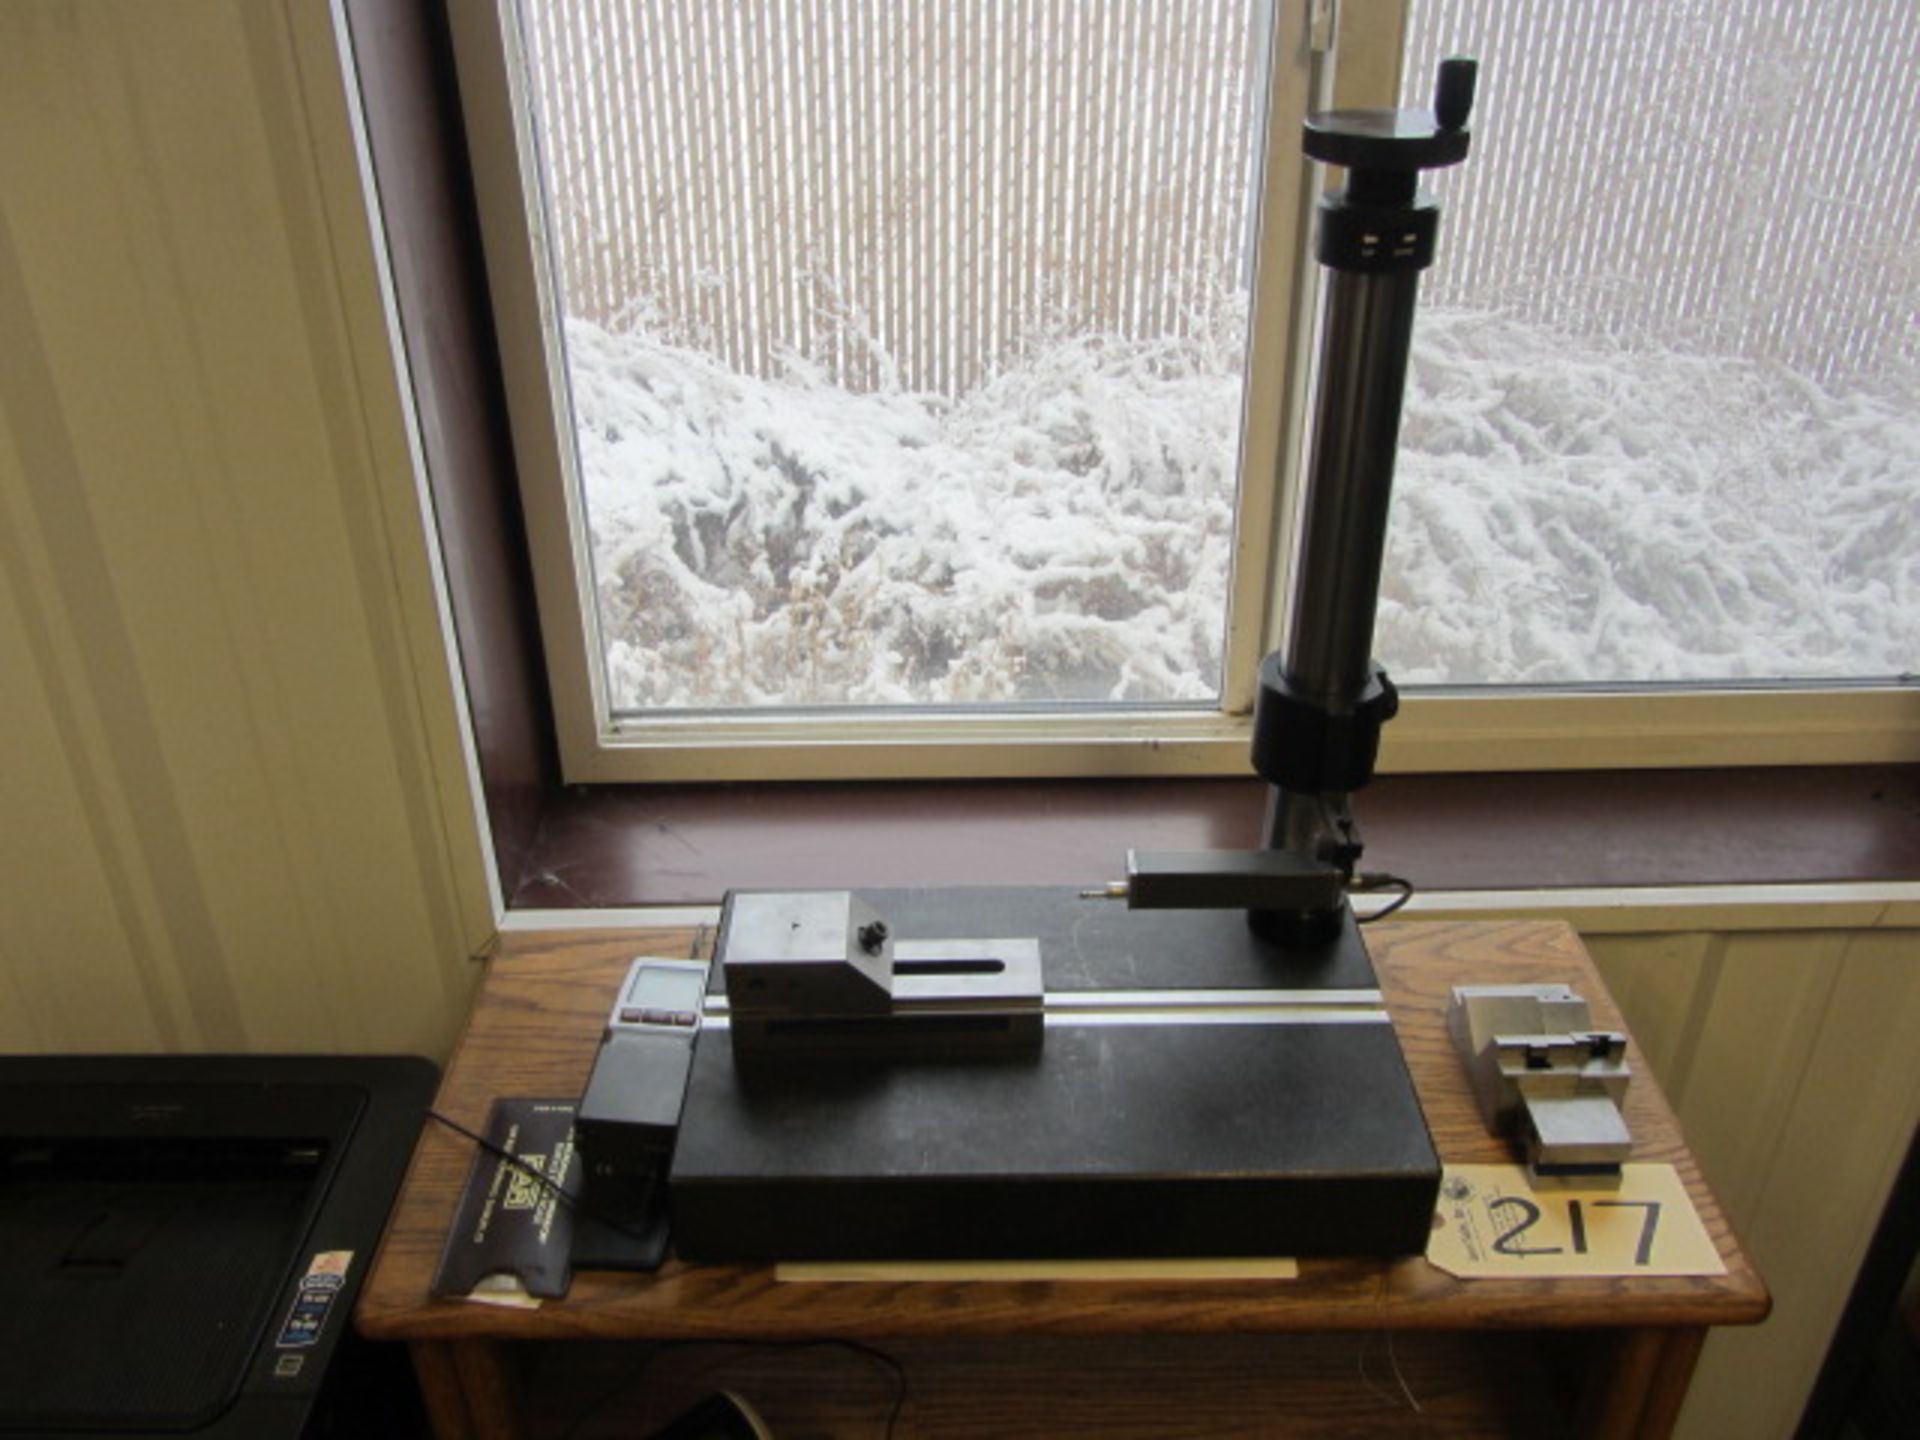 Mitutoyo Granite Surface Plate with SJ-201P Surftest